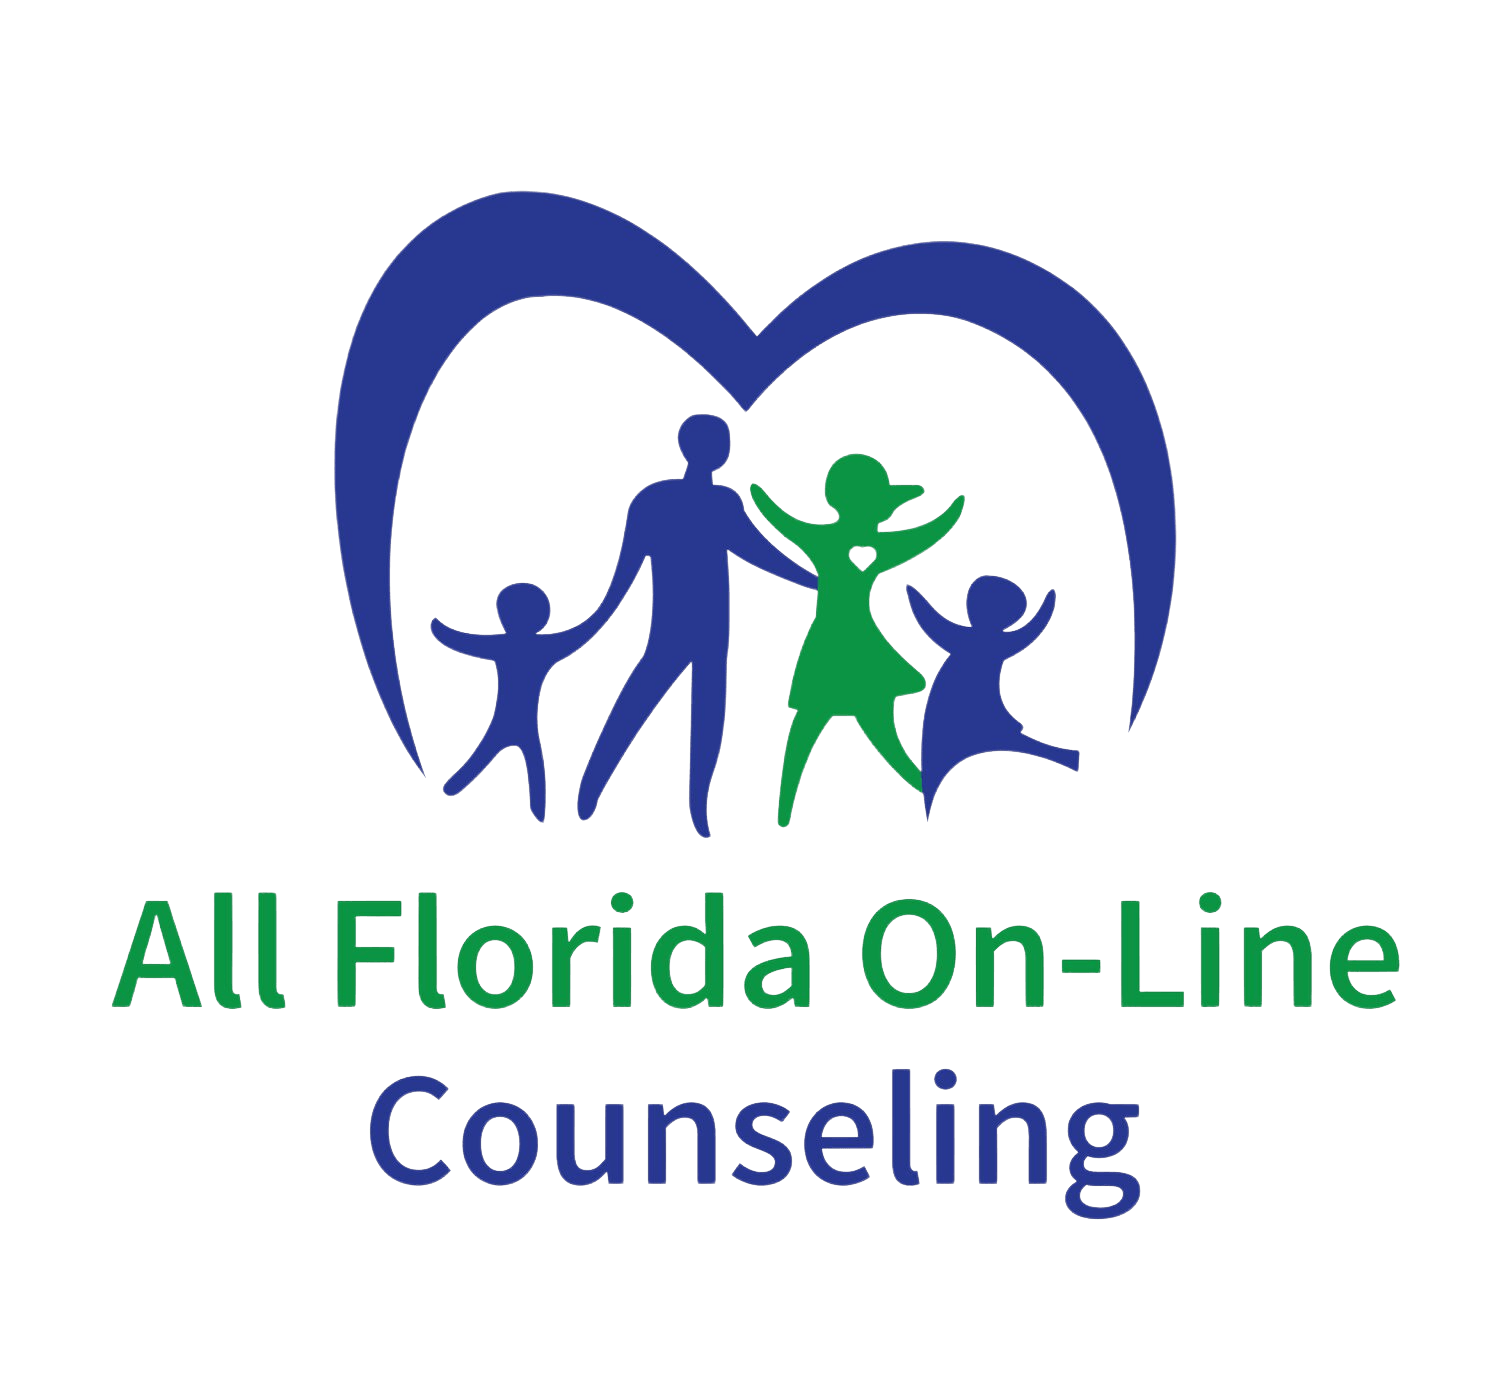 all florida online counseling logo